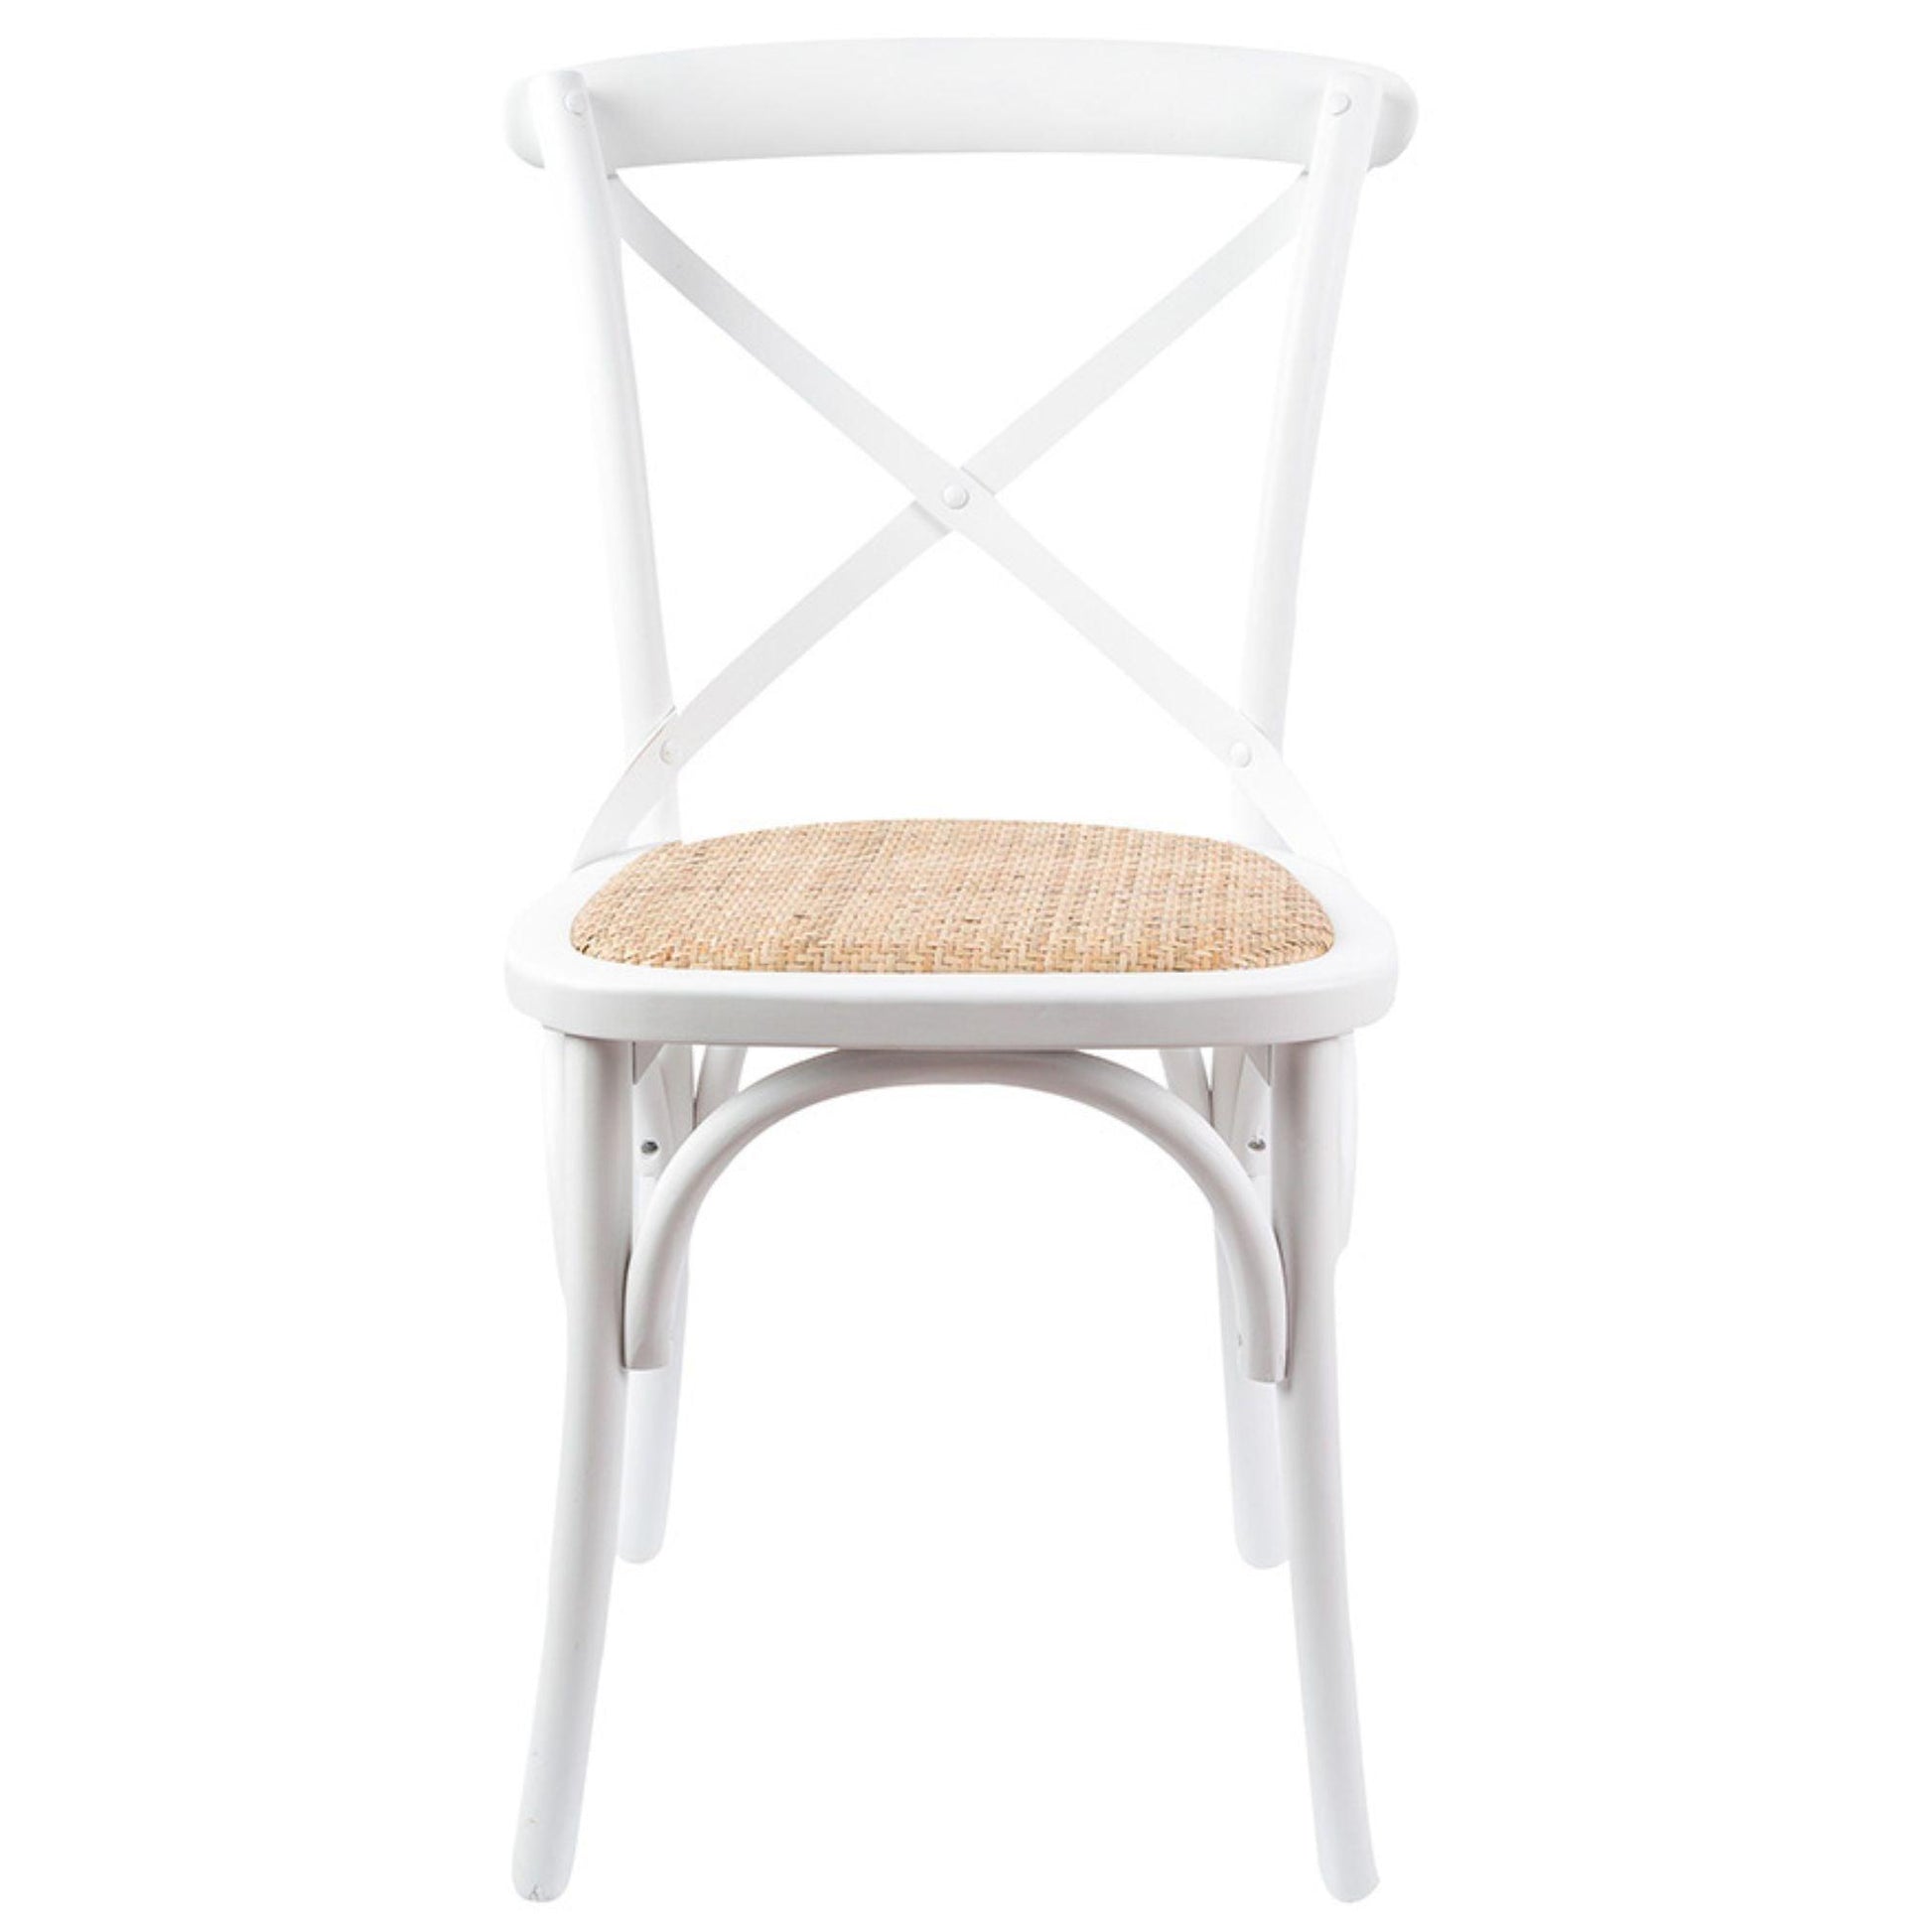 Aster Crossback Dining Chair Set of 2 Solid Birch Timber Wood Ratan Seat - White